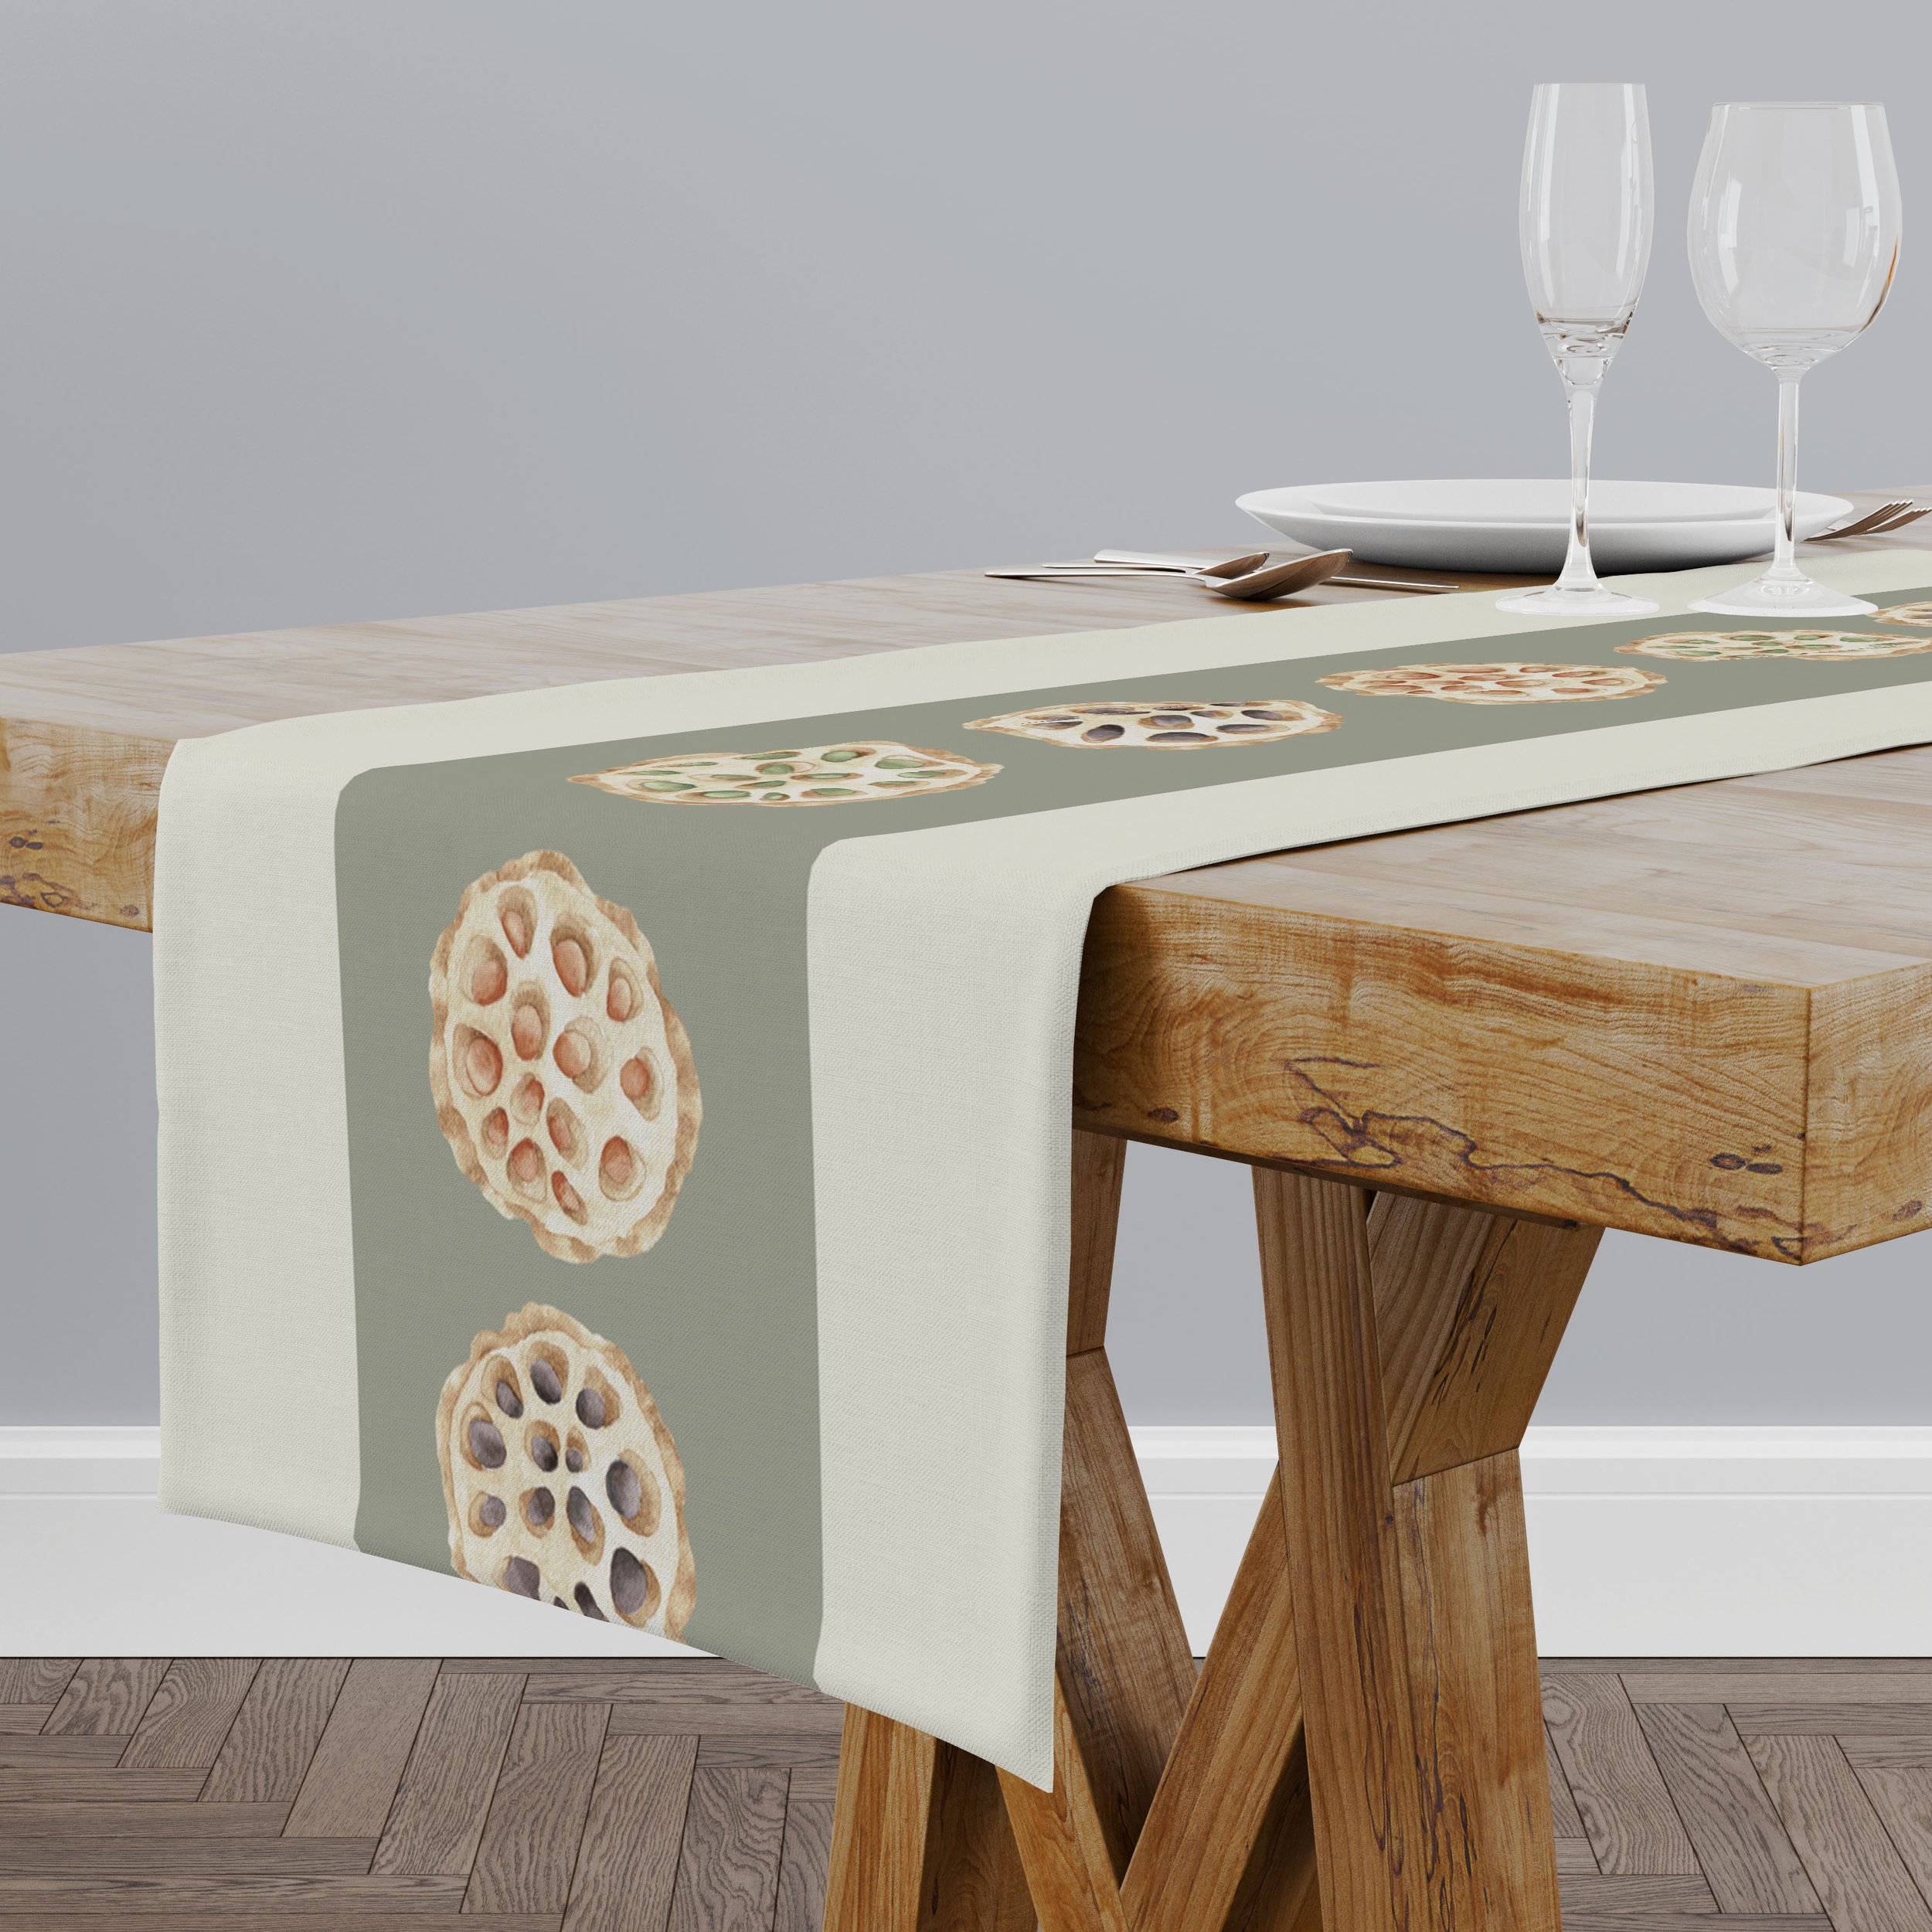 Lotus Seed Pods Band Table Runner